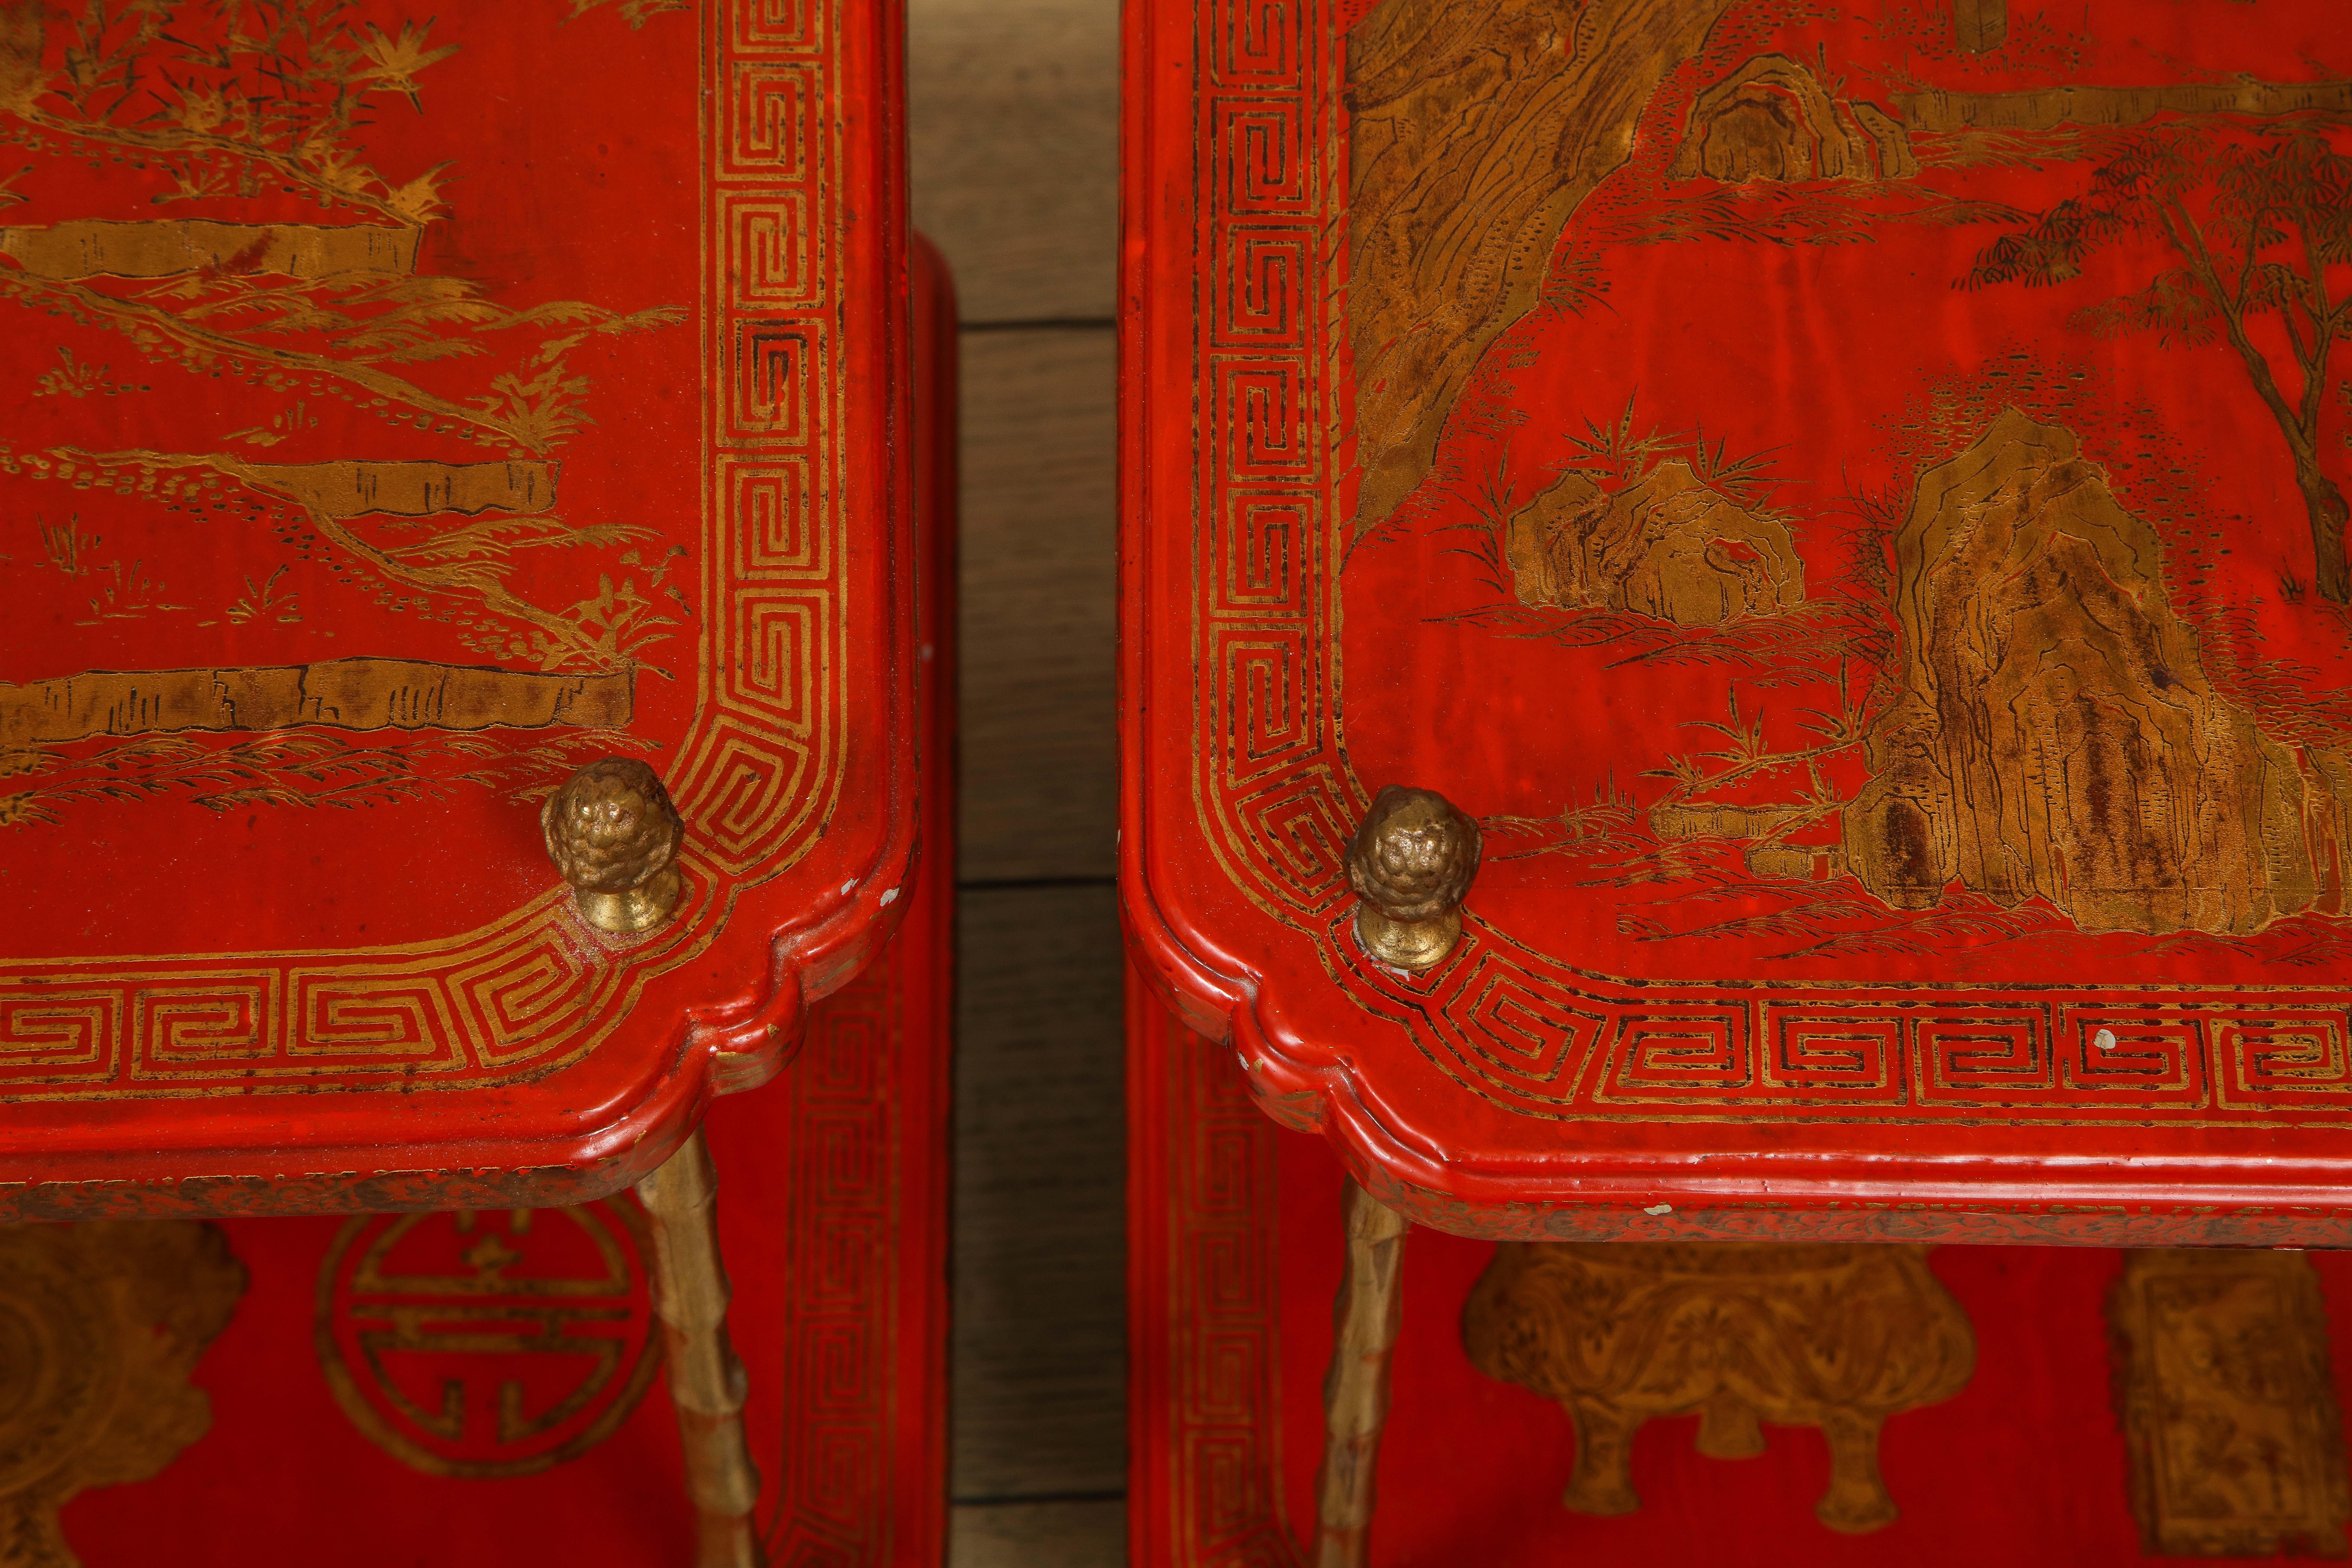 Beautiful pair of red lacquer tables with gold leaf accents, chinoiserie style.
The legs are bronze with bamboo shape. Rare pair, 1950s, France.

Measures: Height 25.5 in. (64.77 cm)
Width 21.75 in. (55.25 cm)
Depth 14.5 in. (36.83 cm).
 